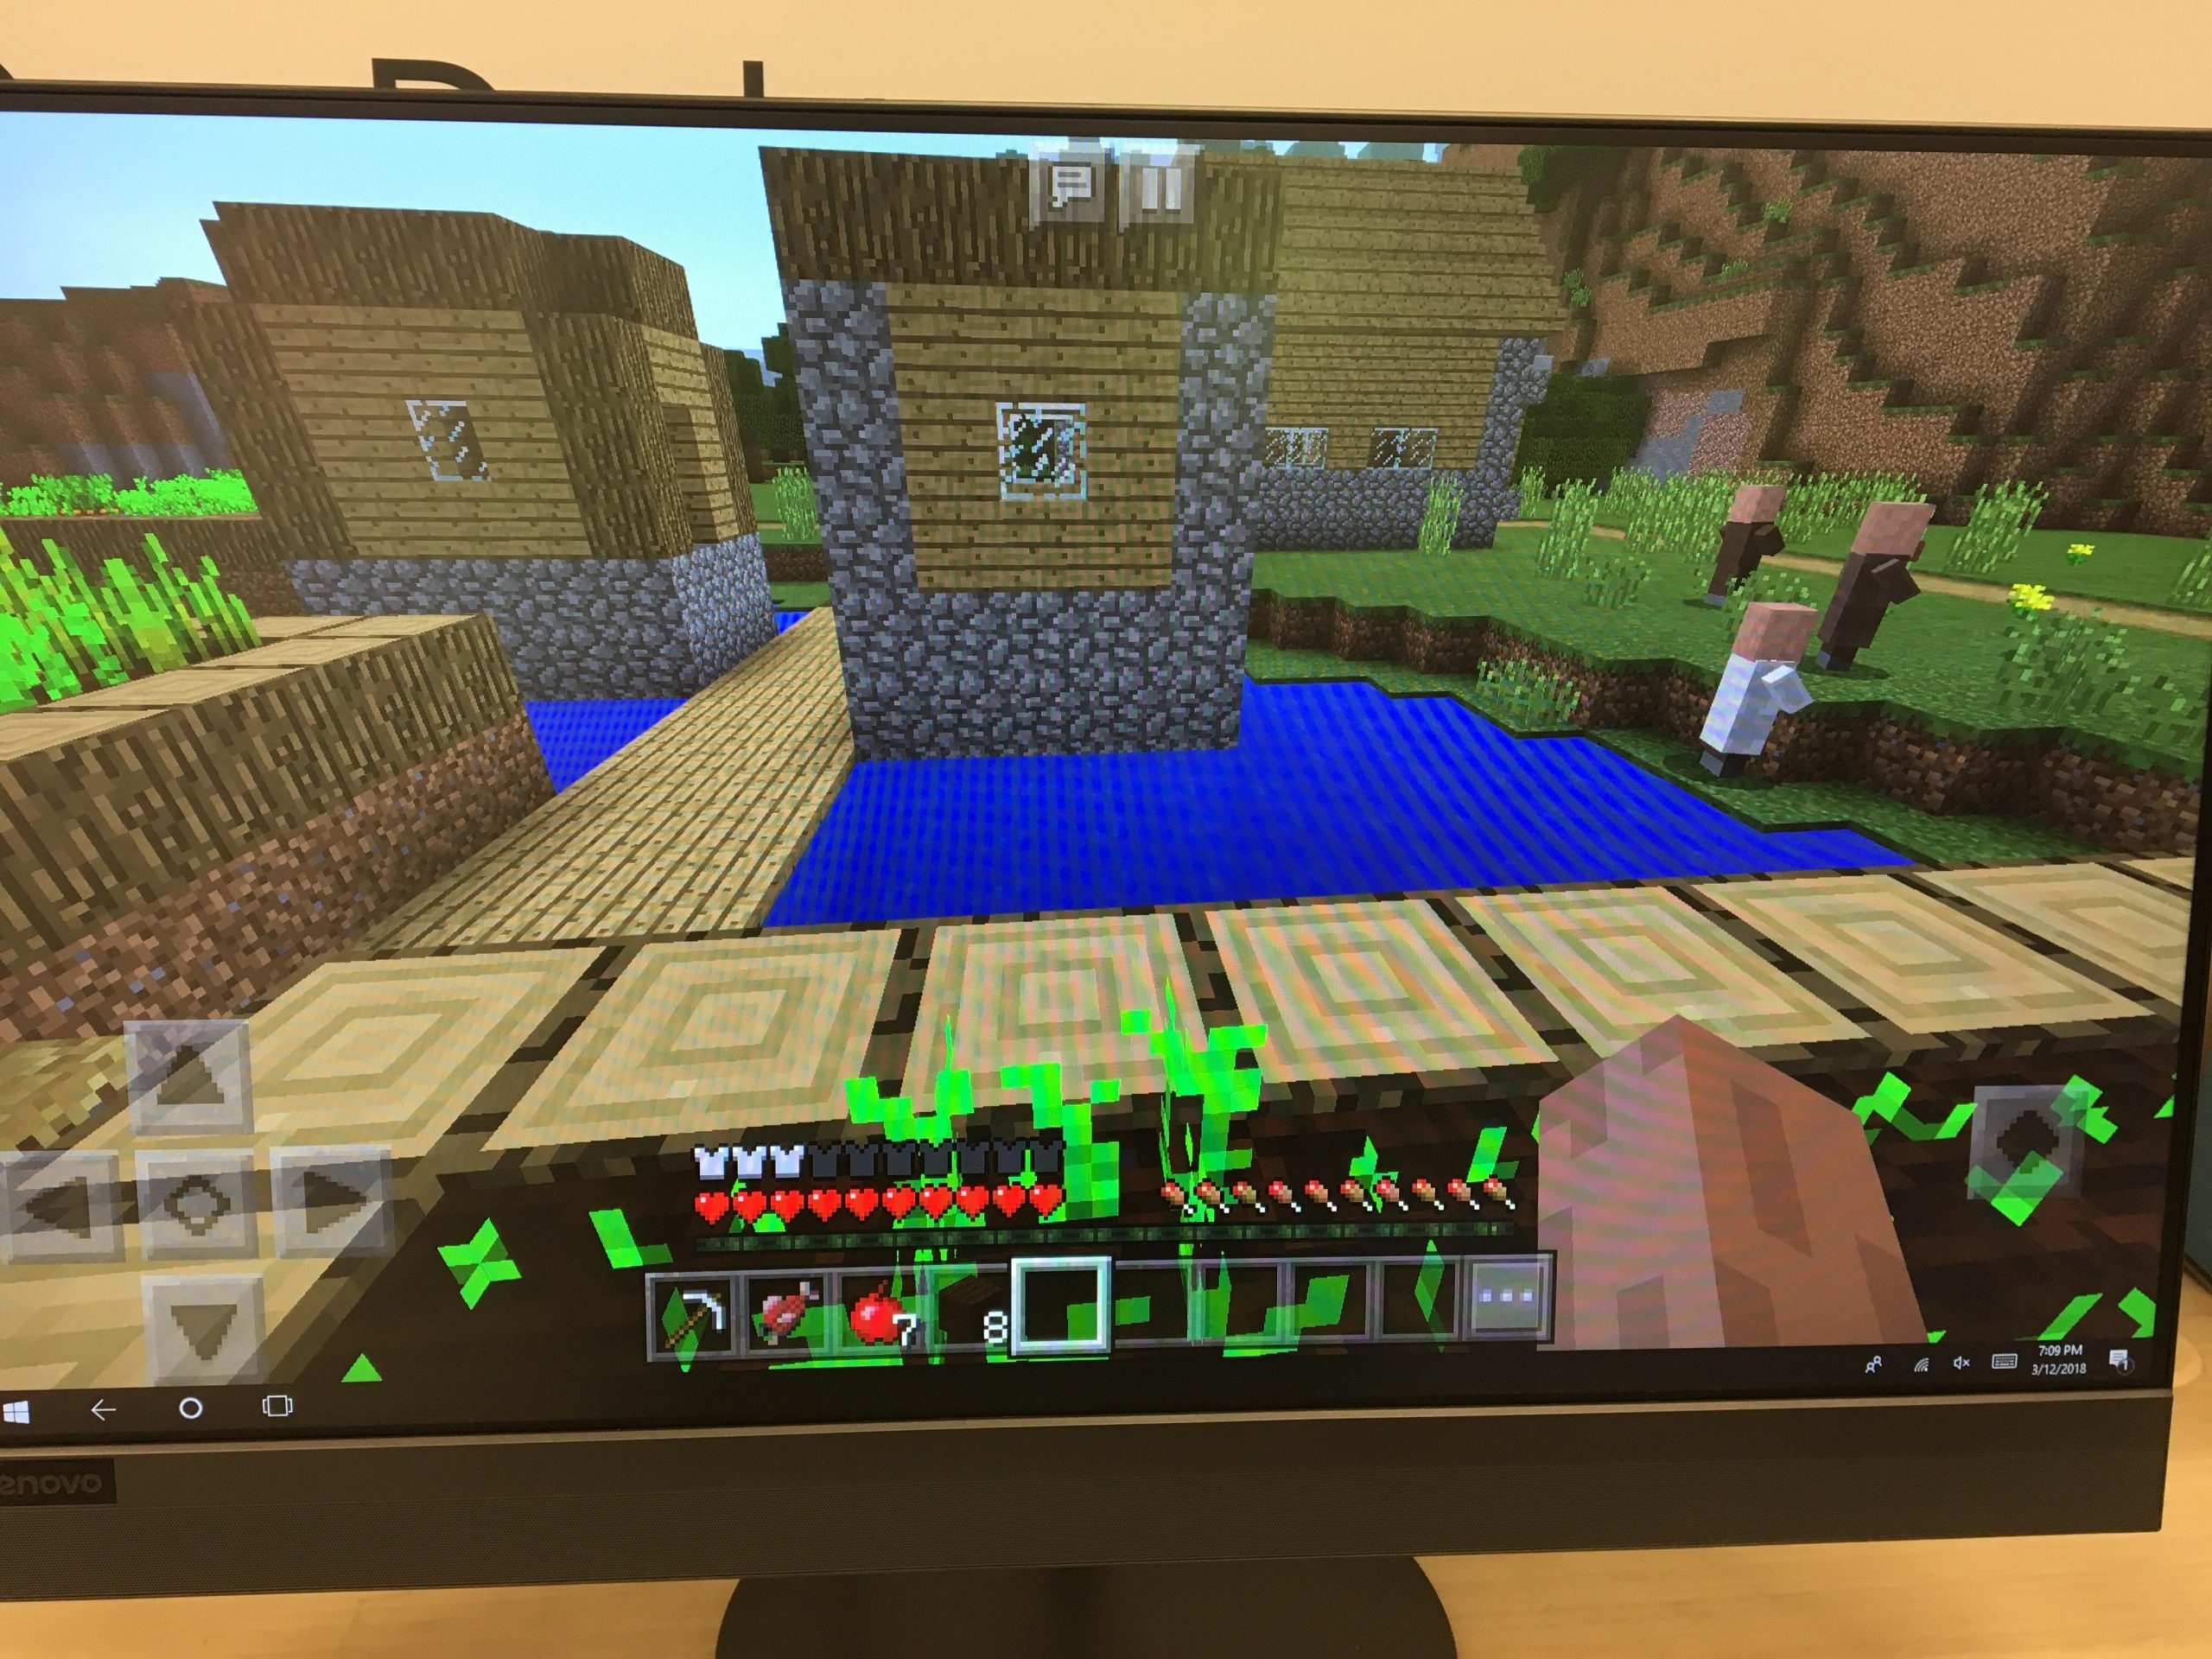 Apparently we can play Minecraft on a demo computer : OfficeDepot